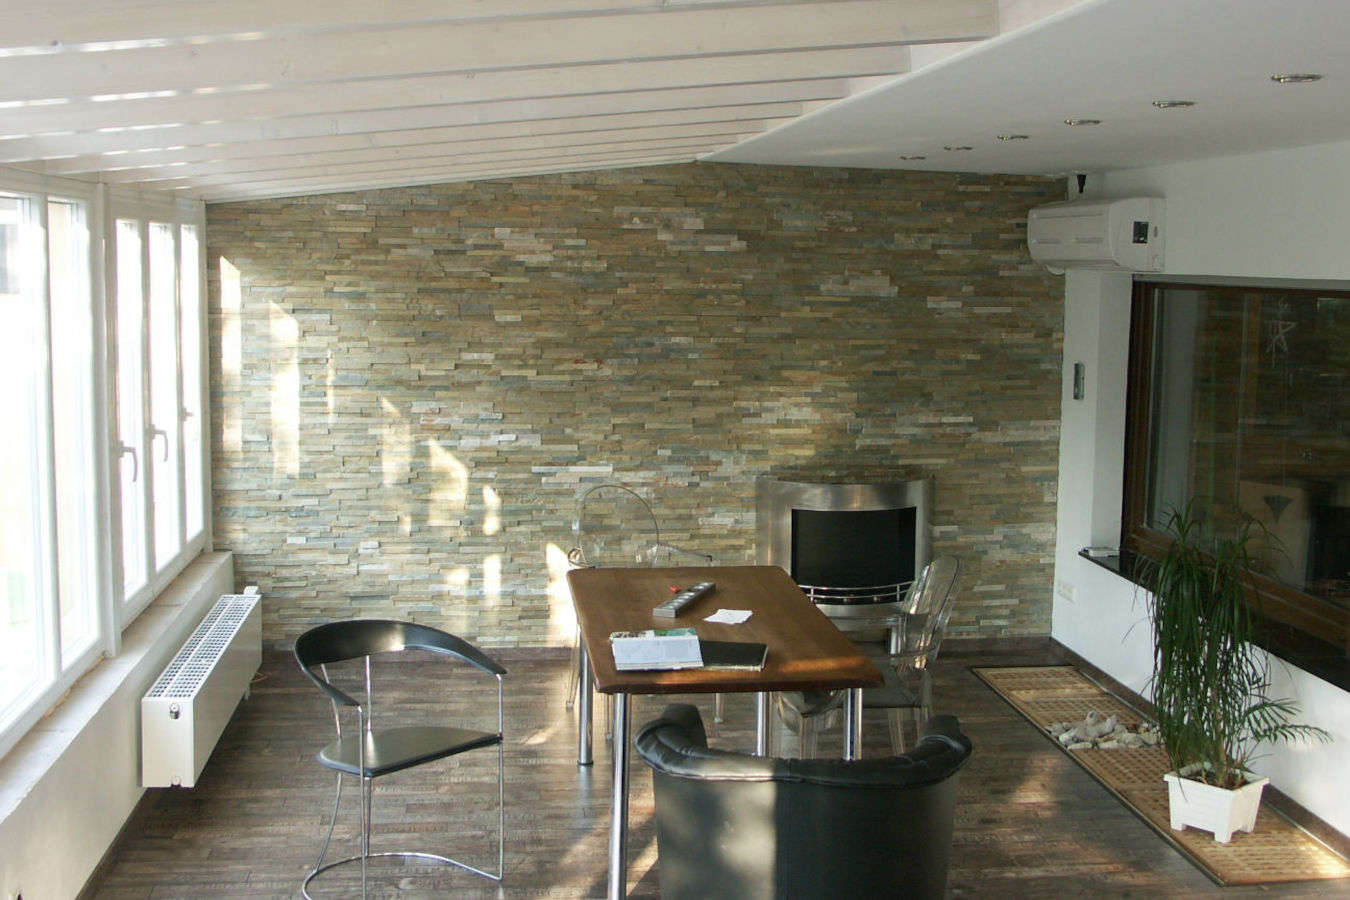 Chicago masonry contractor refinished wall with stone veneer